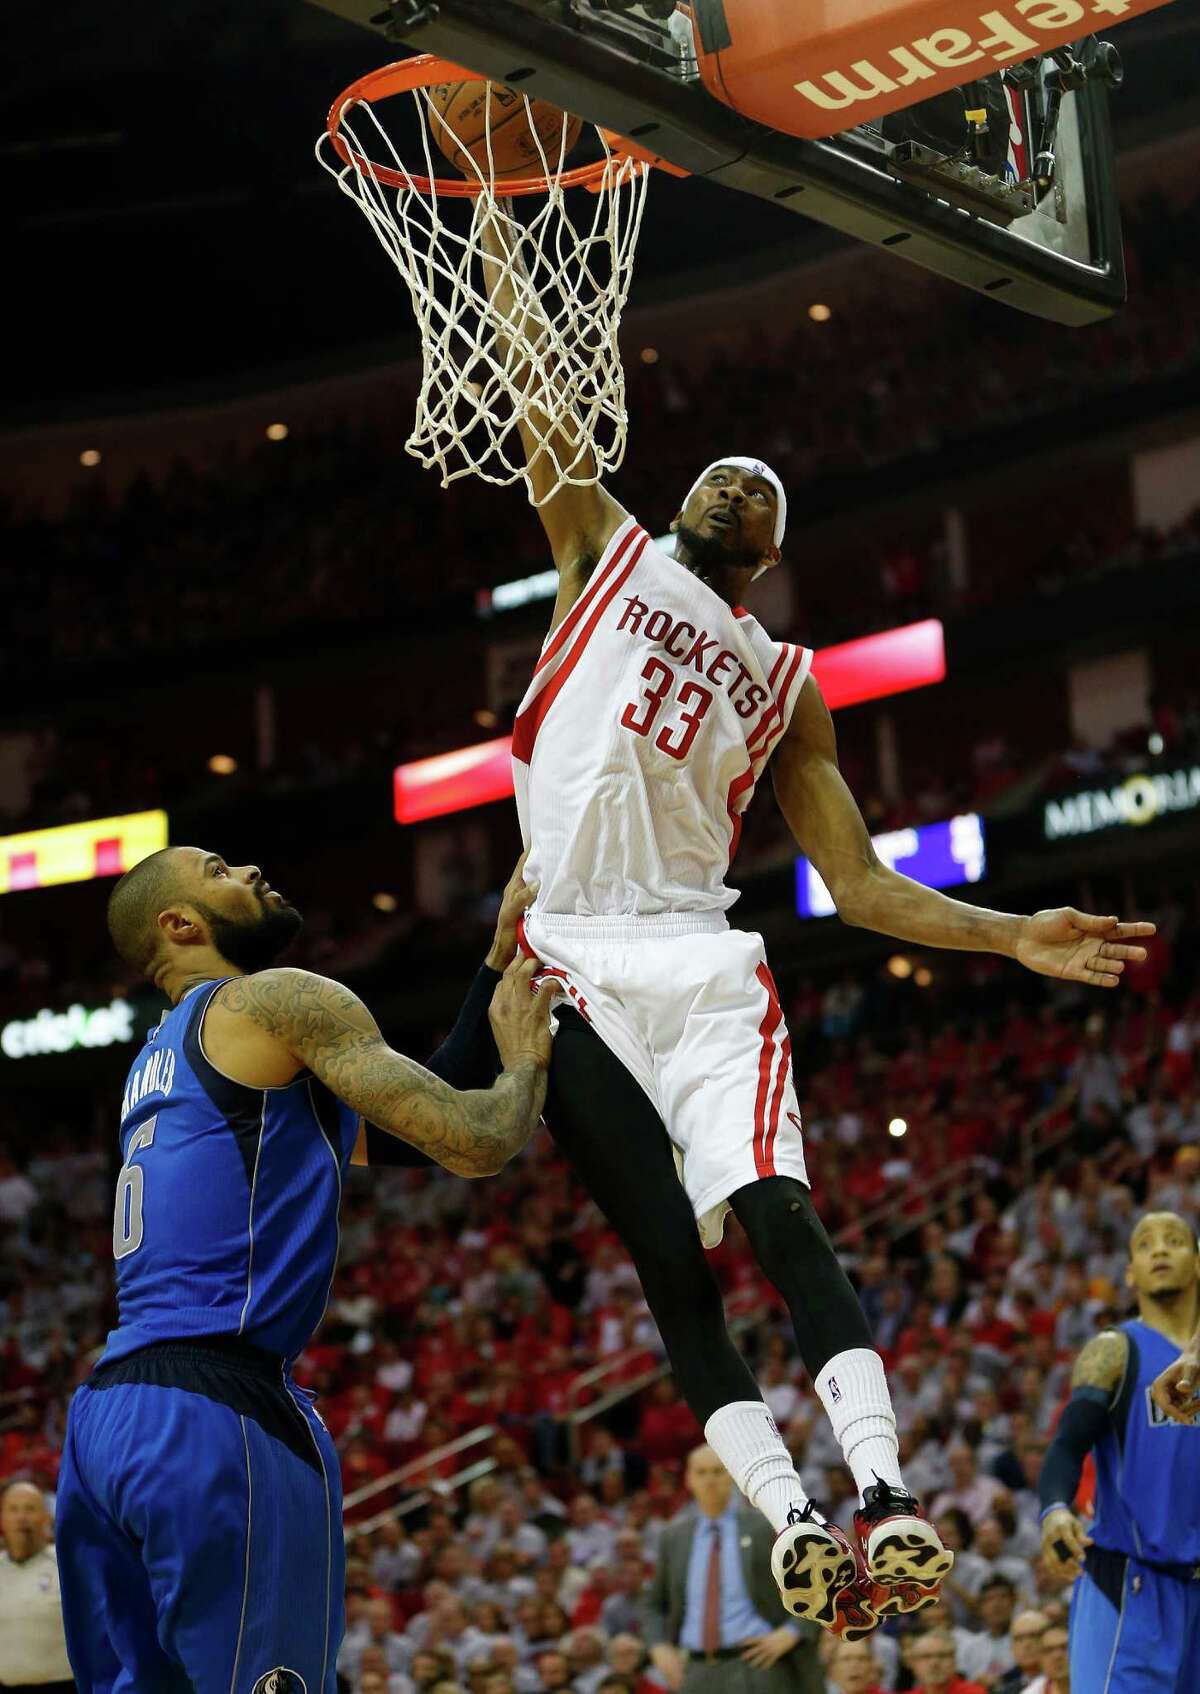 Corey Brewer gets in on the Game 2 fun that saw the Rockets unleash 14 dunks.